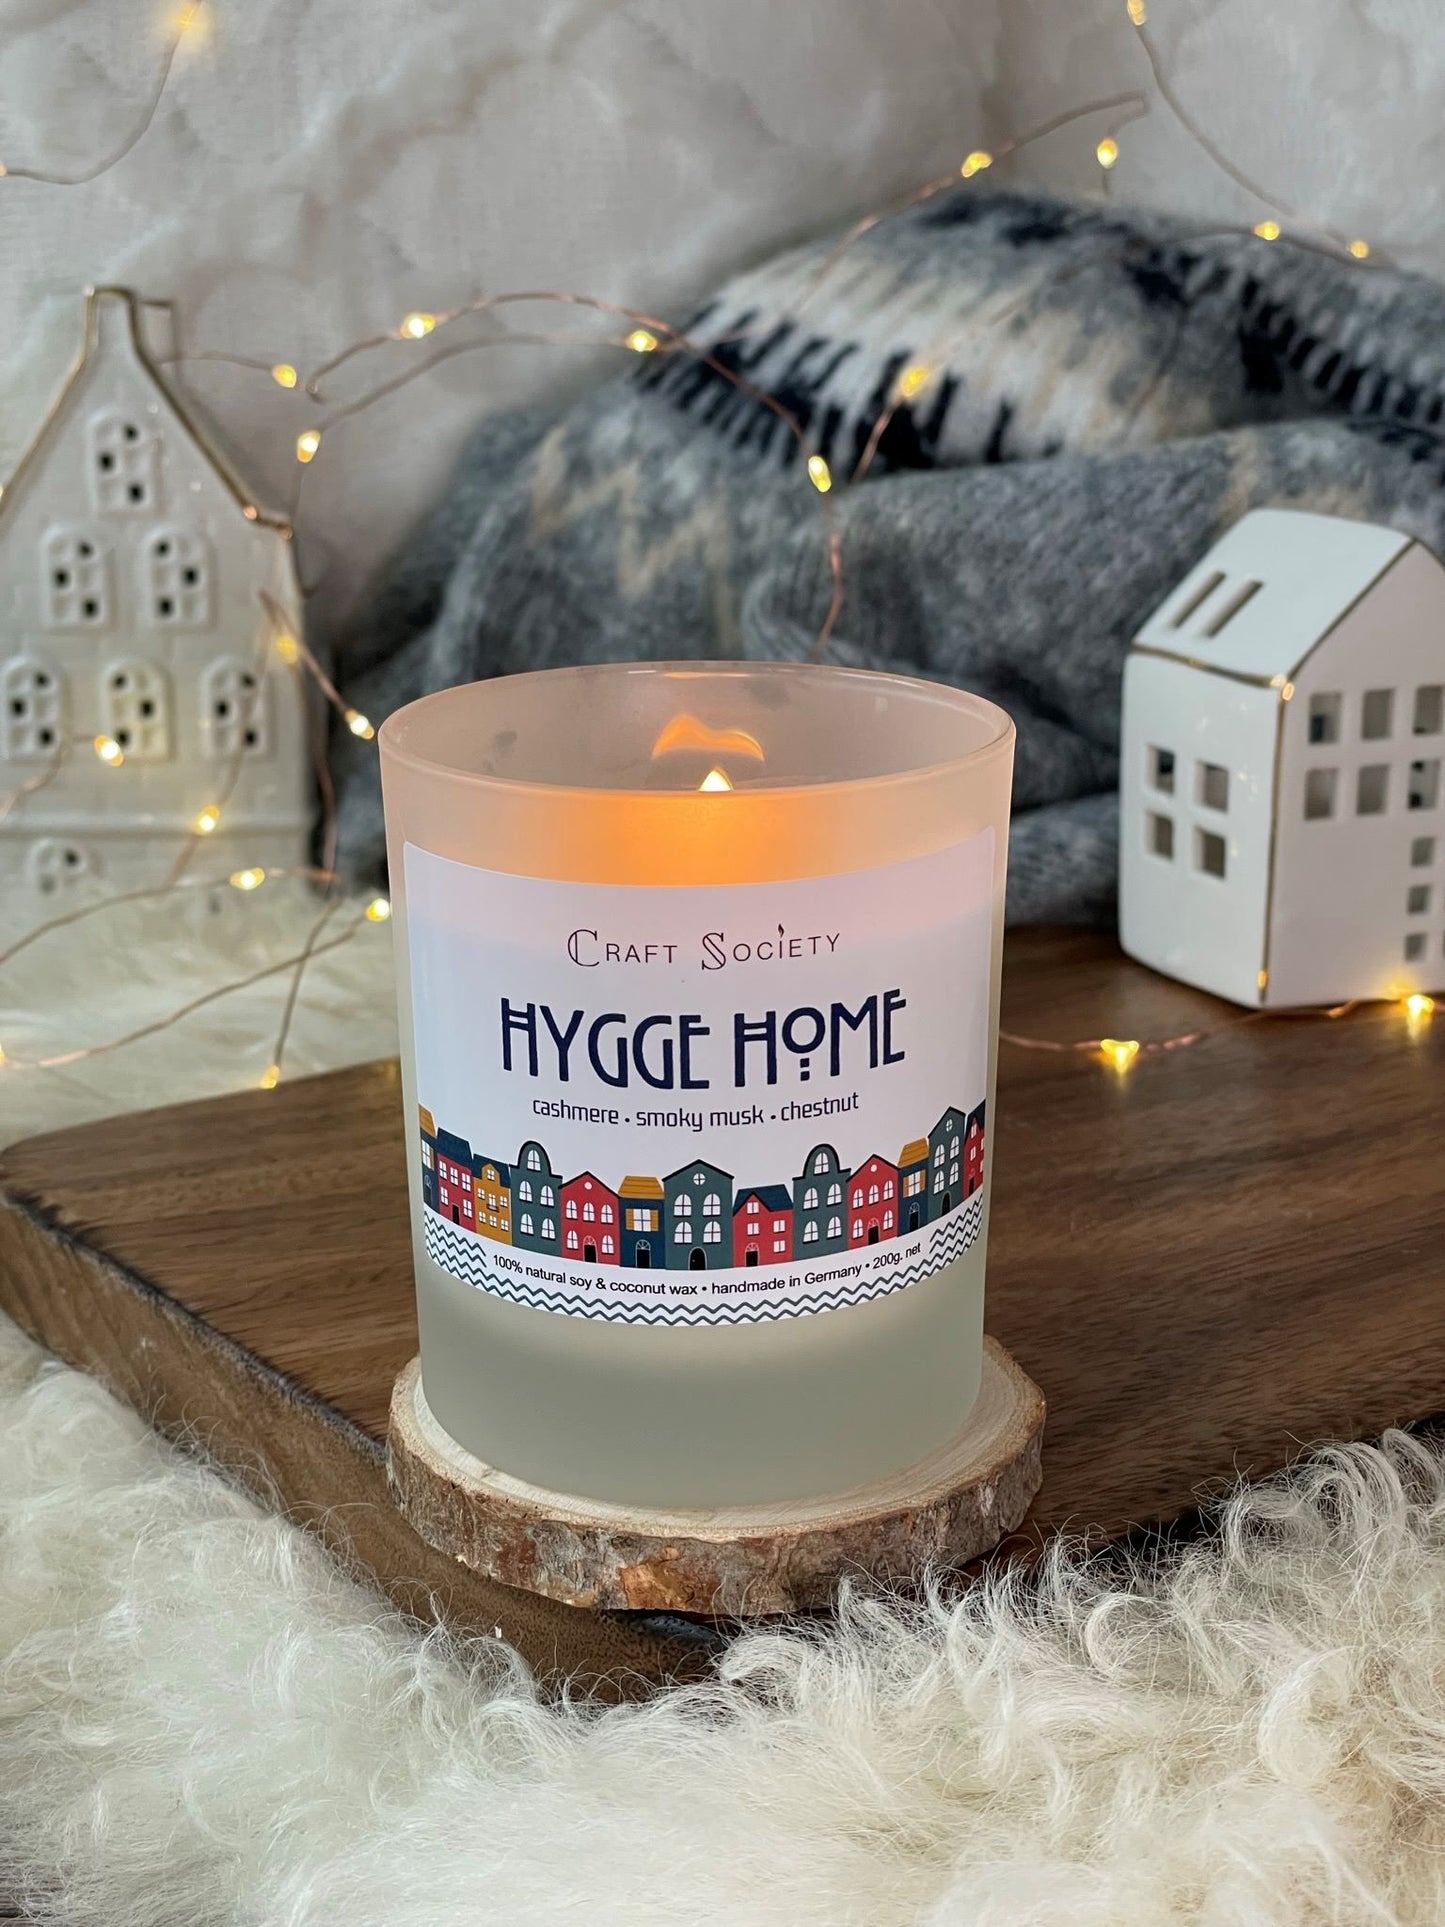 A lit deluxe scented candle made from vegetable wax on a decorated background